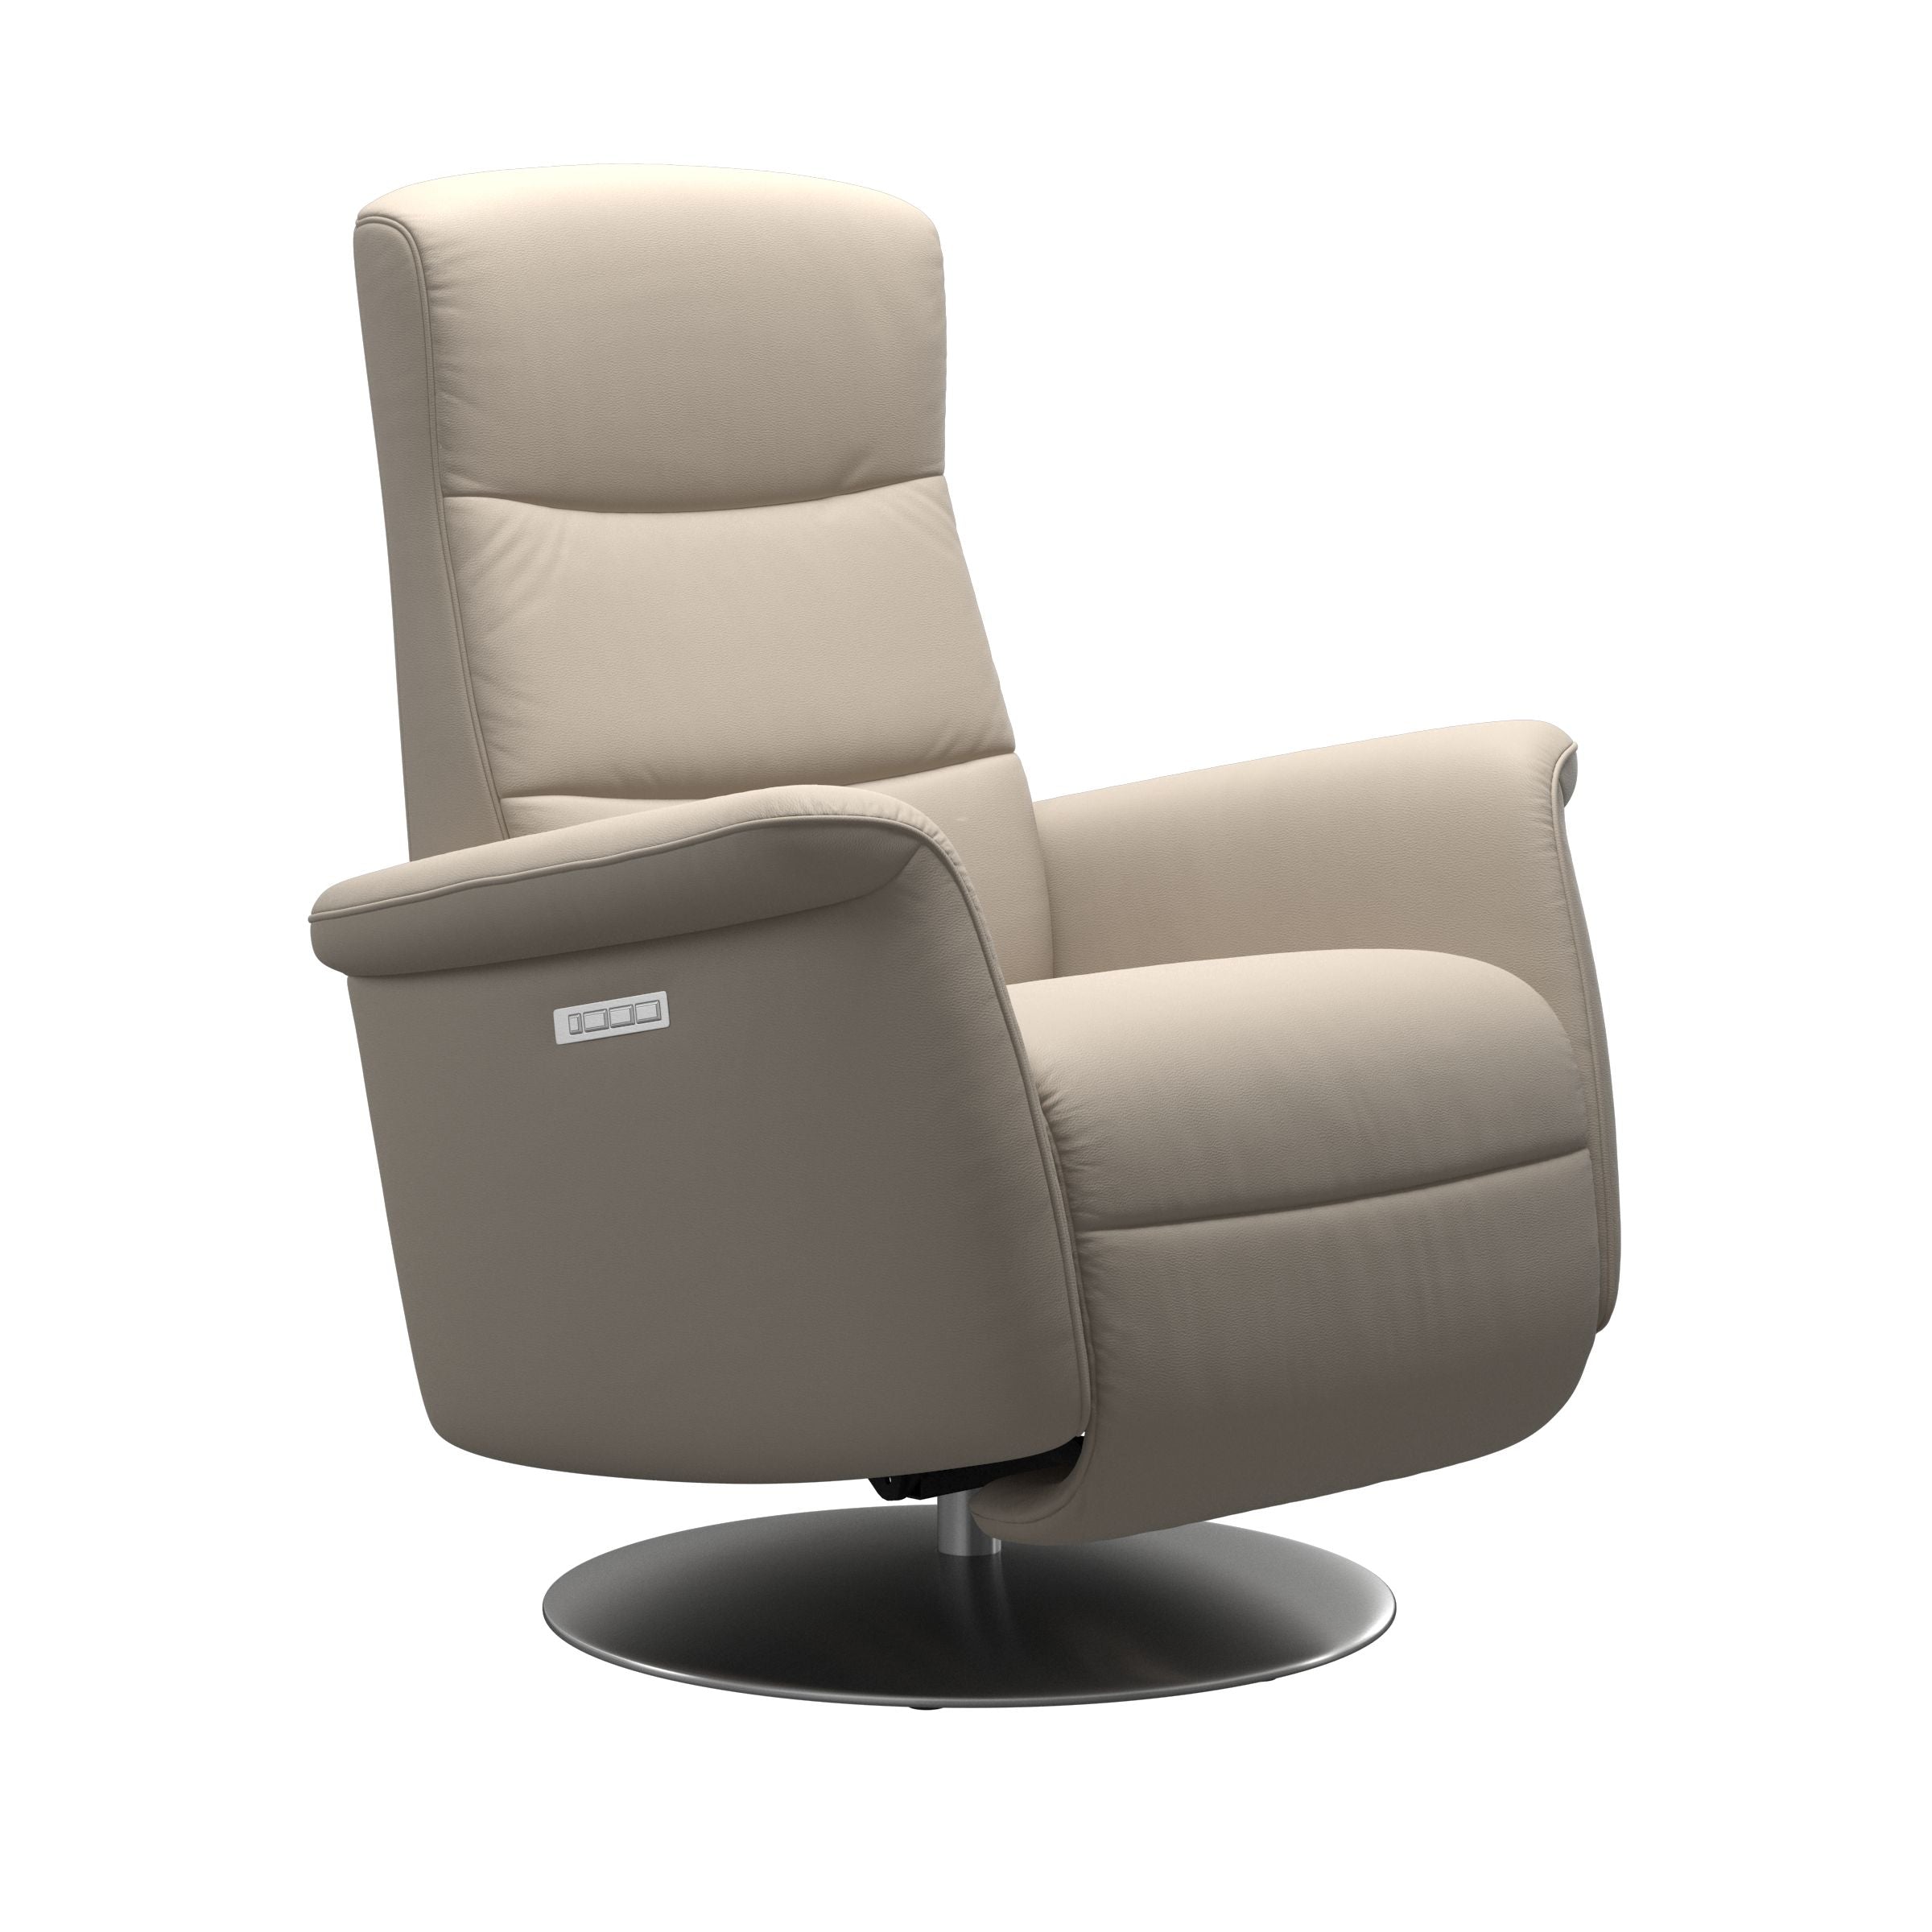 Stressless Mike Small Recliner with Steel Moon Base